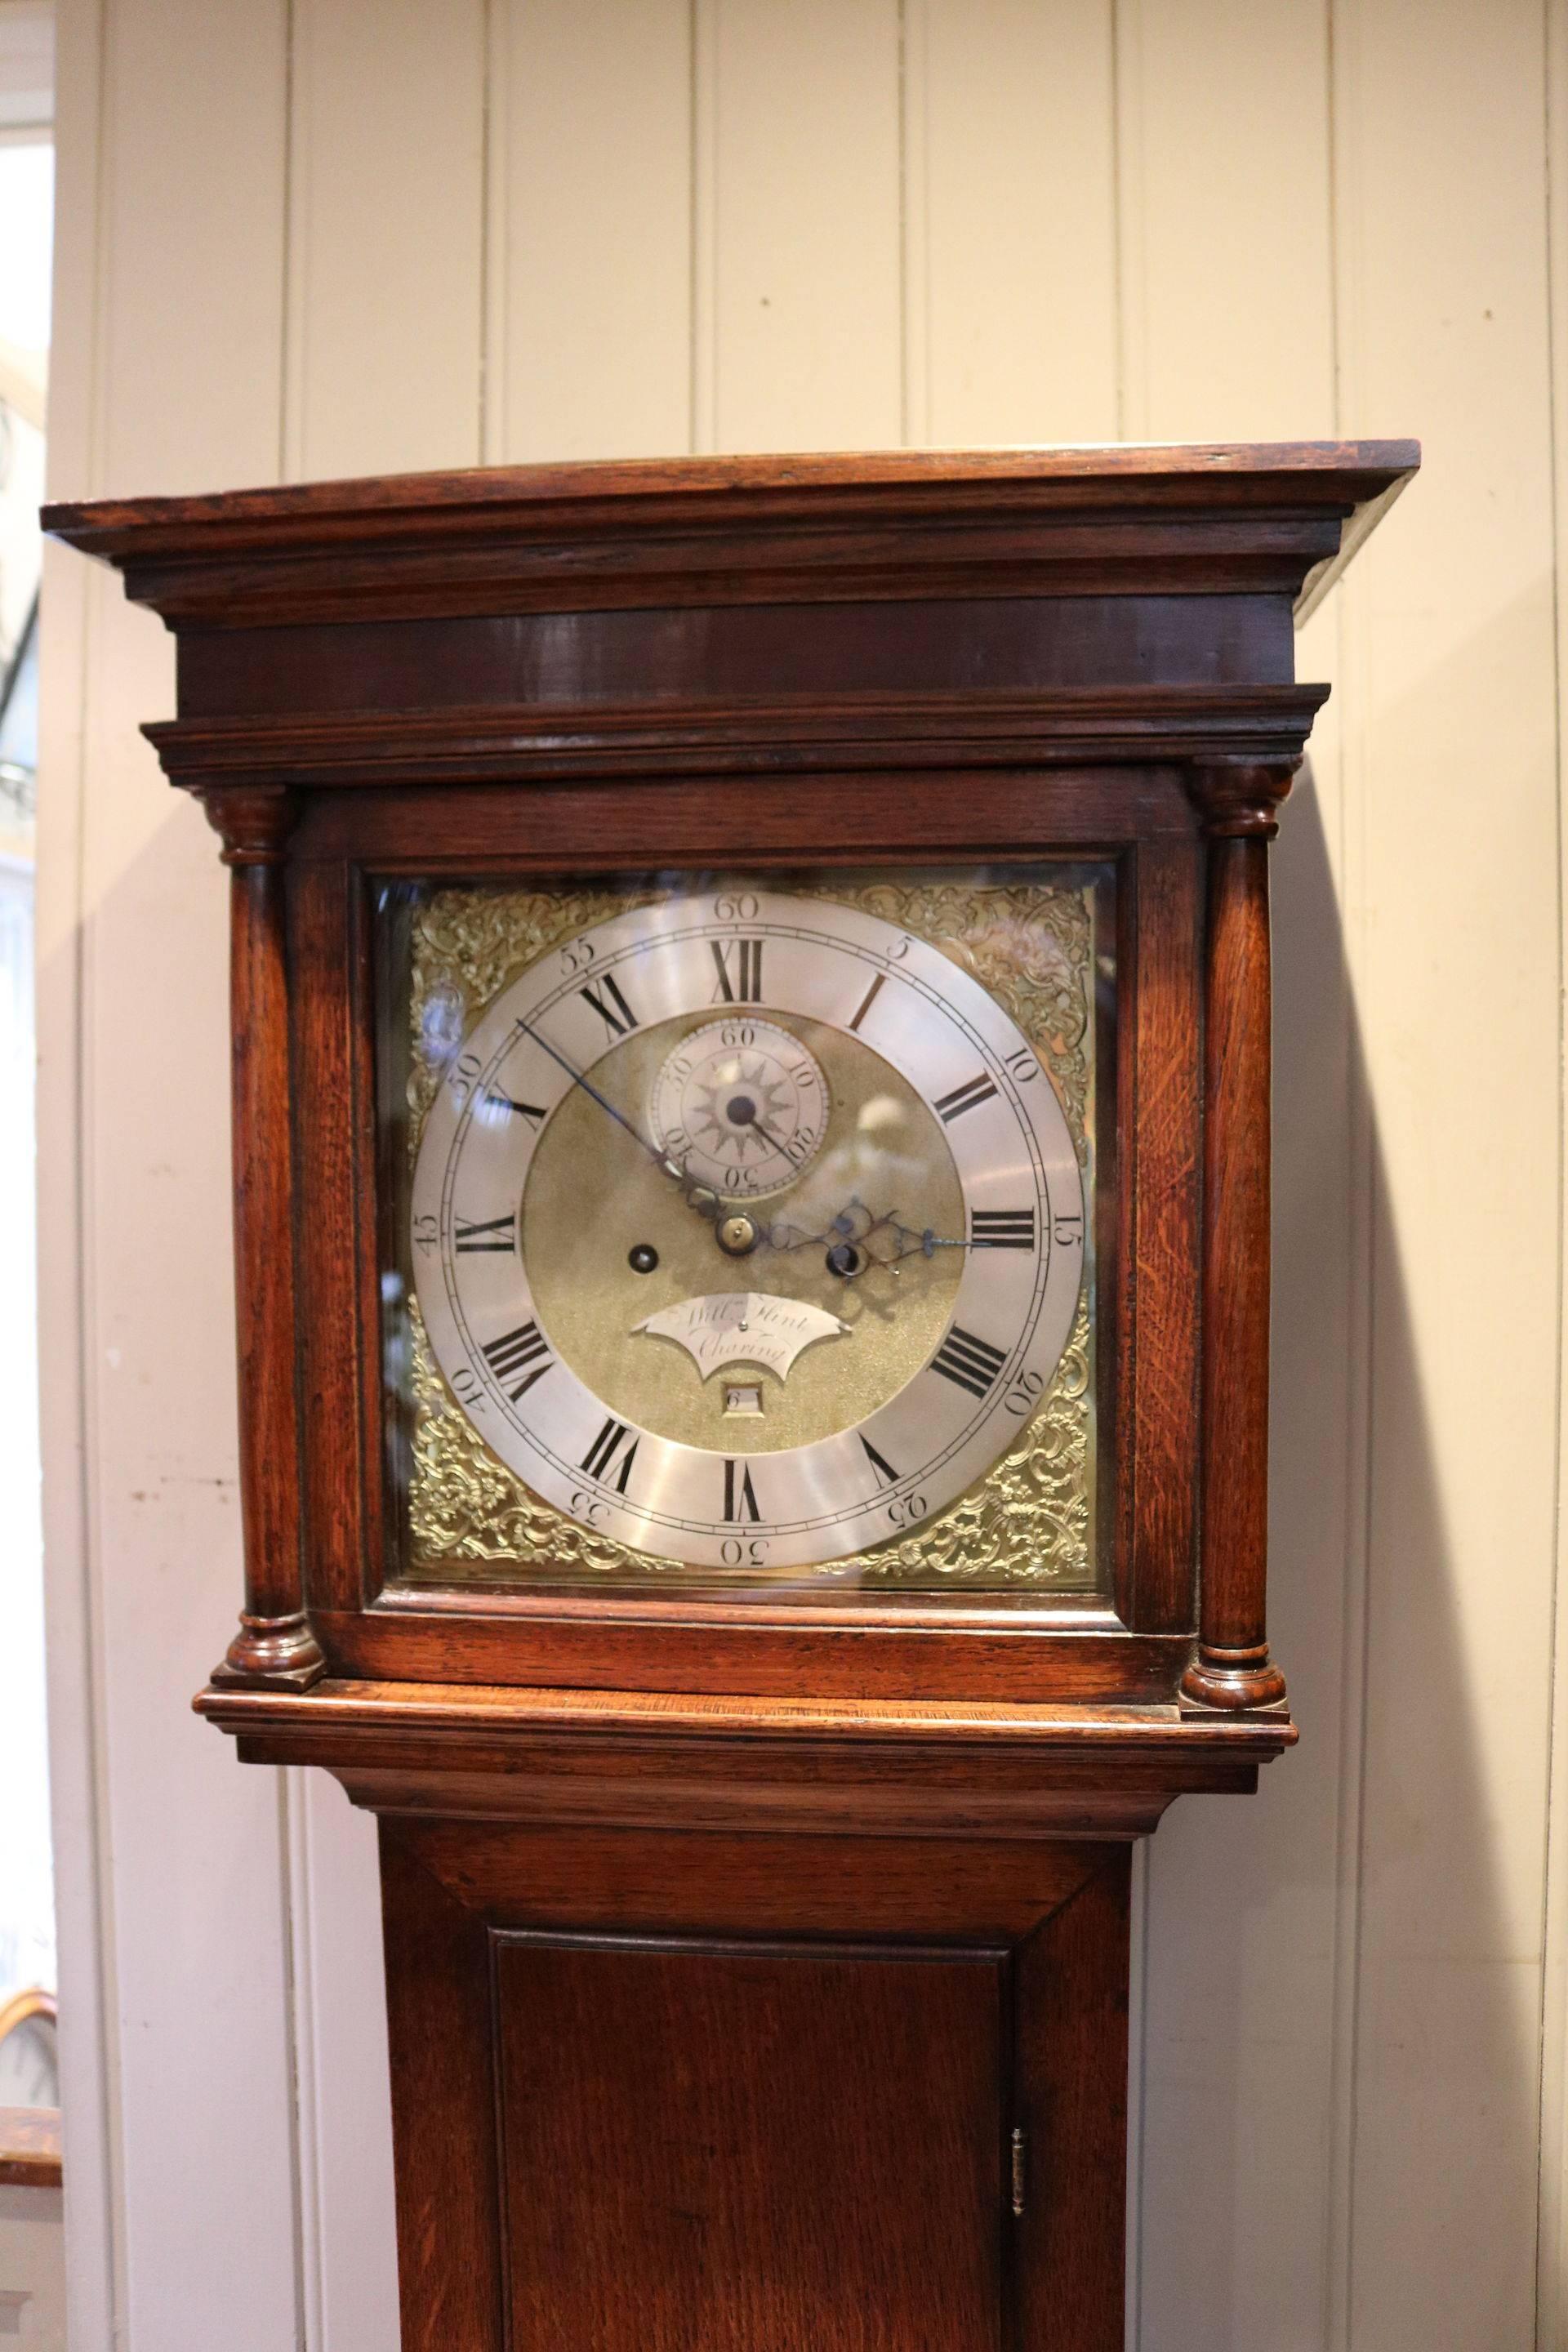 A small, very original solid oak longcase clock from Kent having great color and proportions. This clock is unusual as it is of small proportions, yet the clock is of 8 day duration (most clocks this size are 30 hour). It has a flat top, a square